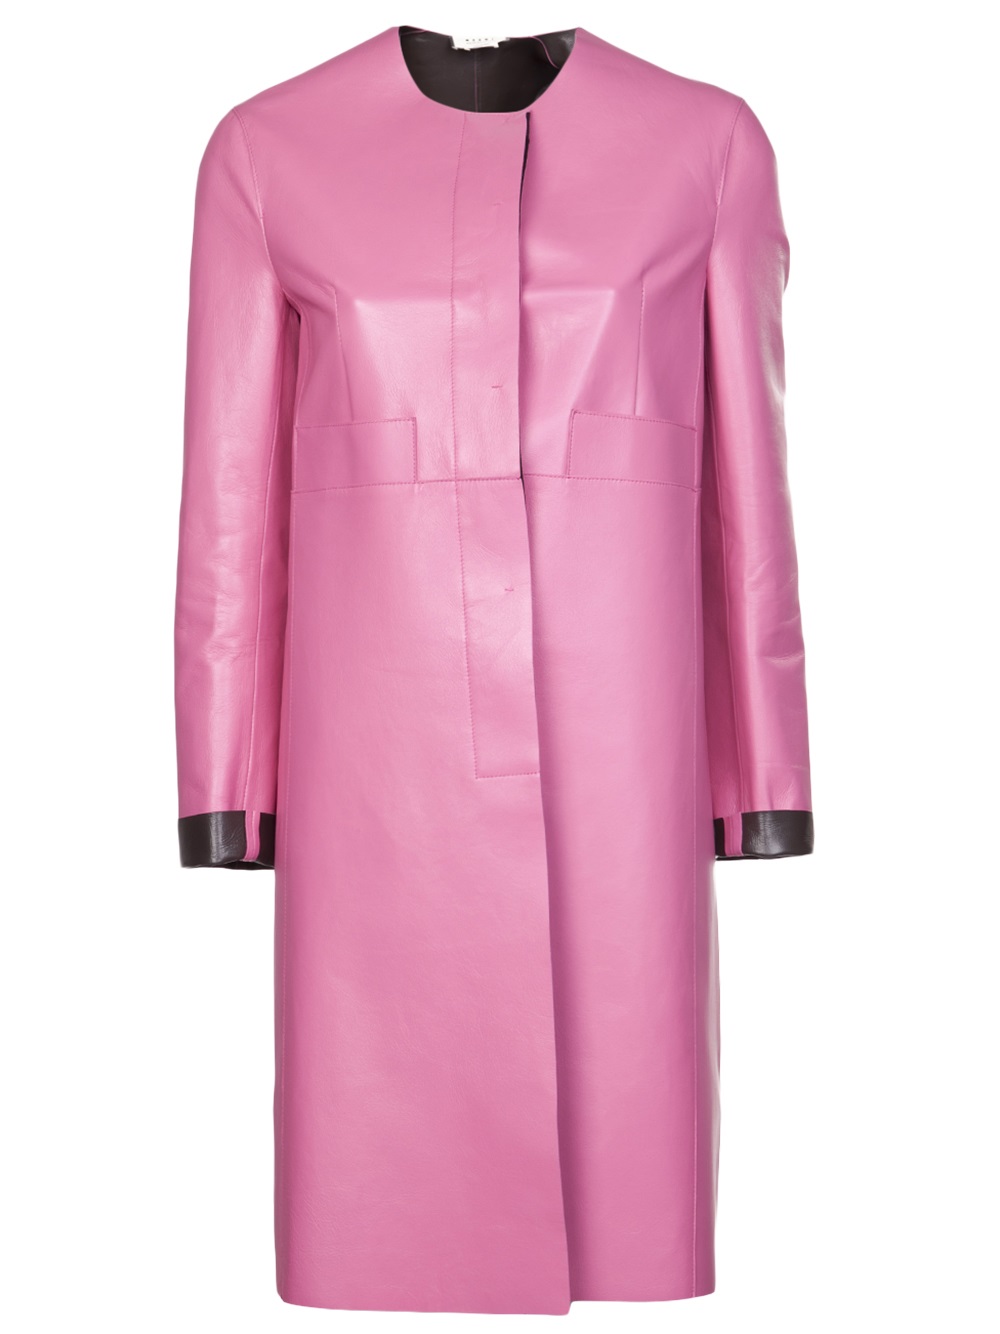 Marni Single Breasted Leather Coat in Pink & Purple (Pink) - Lyst